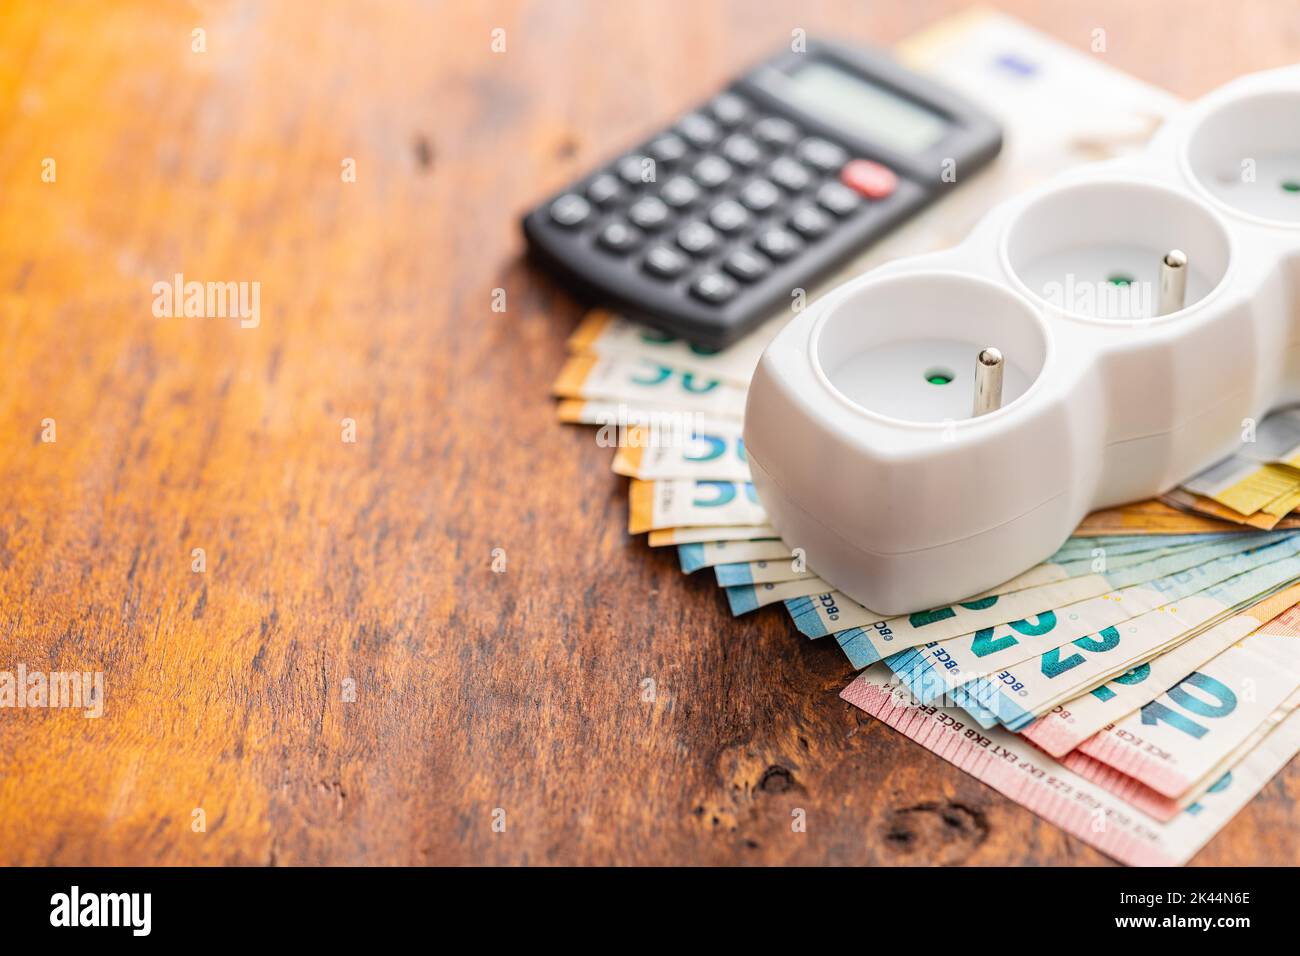 Electric socket and the euro money on the wooden table. Concept of increasing electric prices. Stock Photo